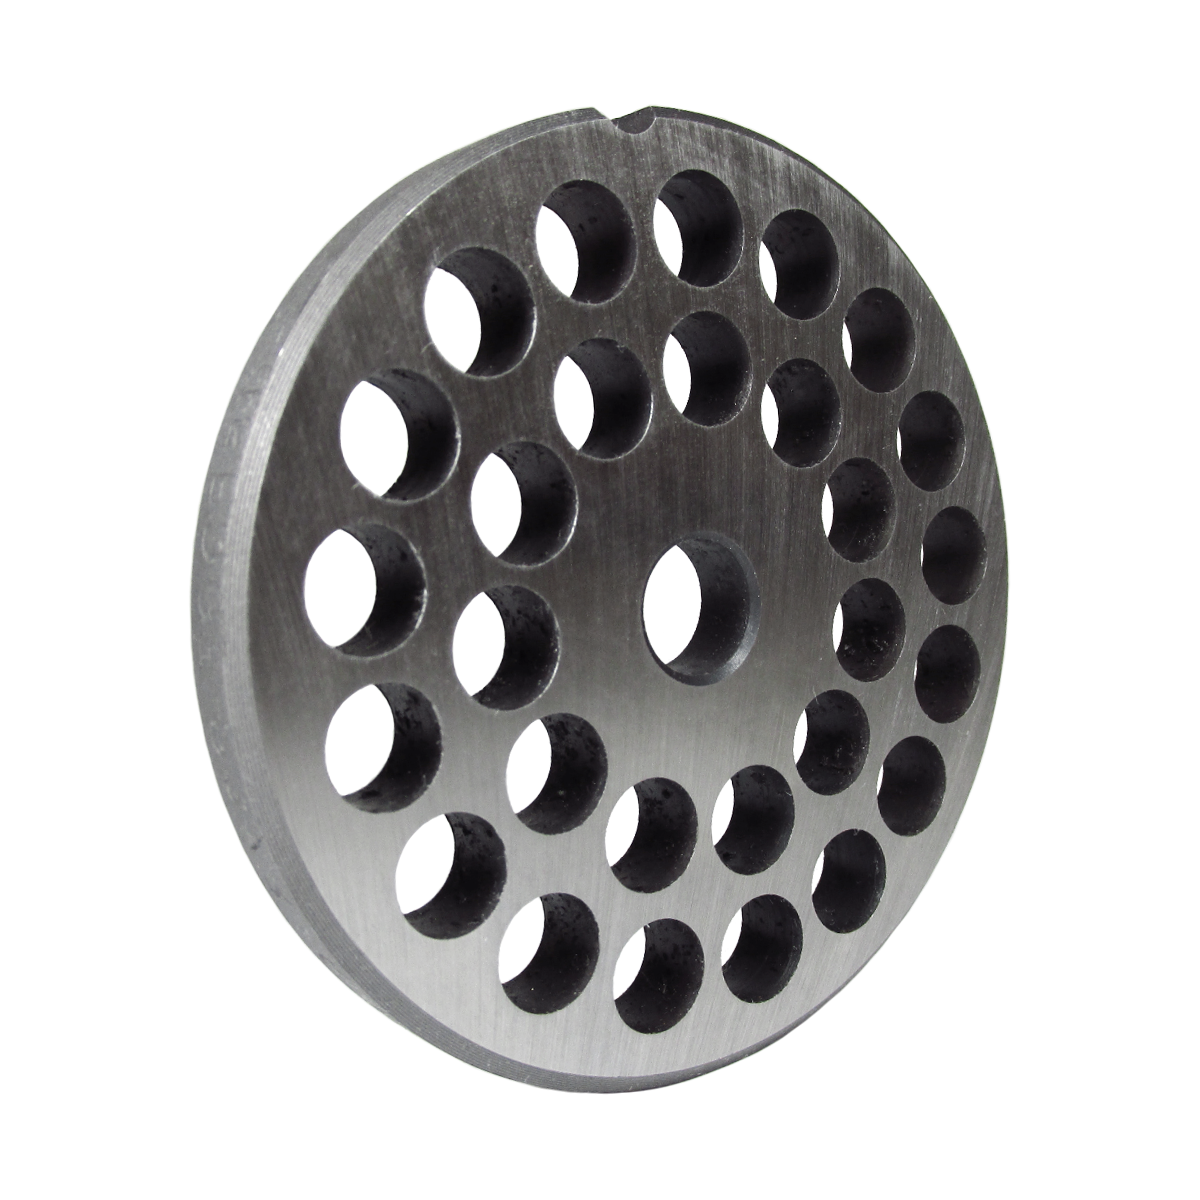 Grinder plate for #22 grinders with 3/8" hole, reversible